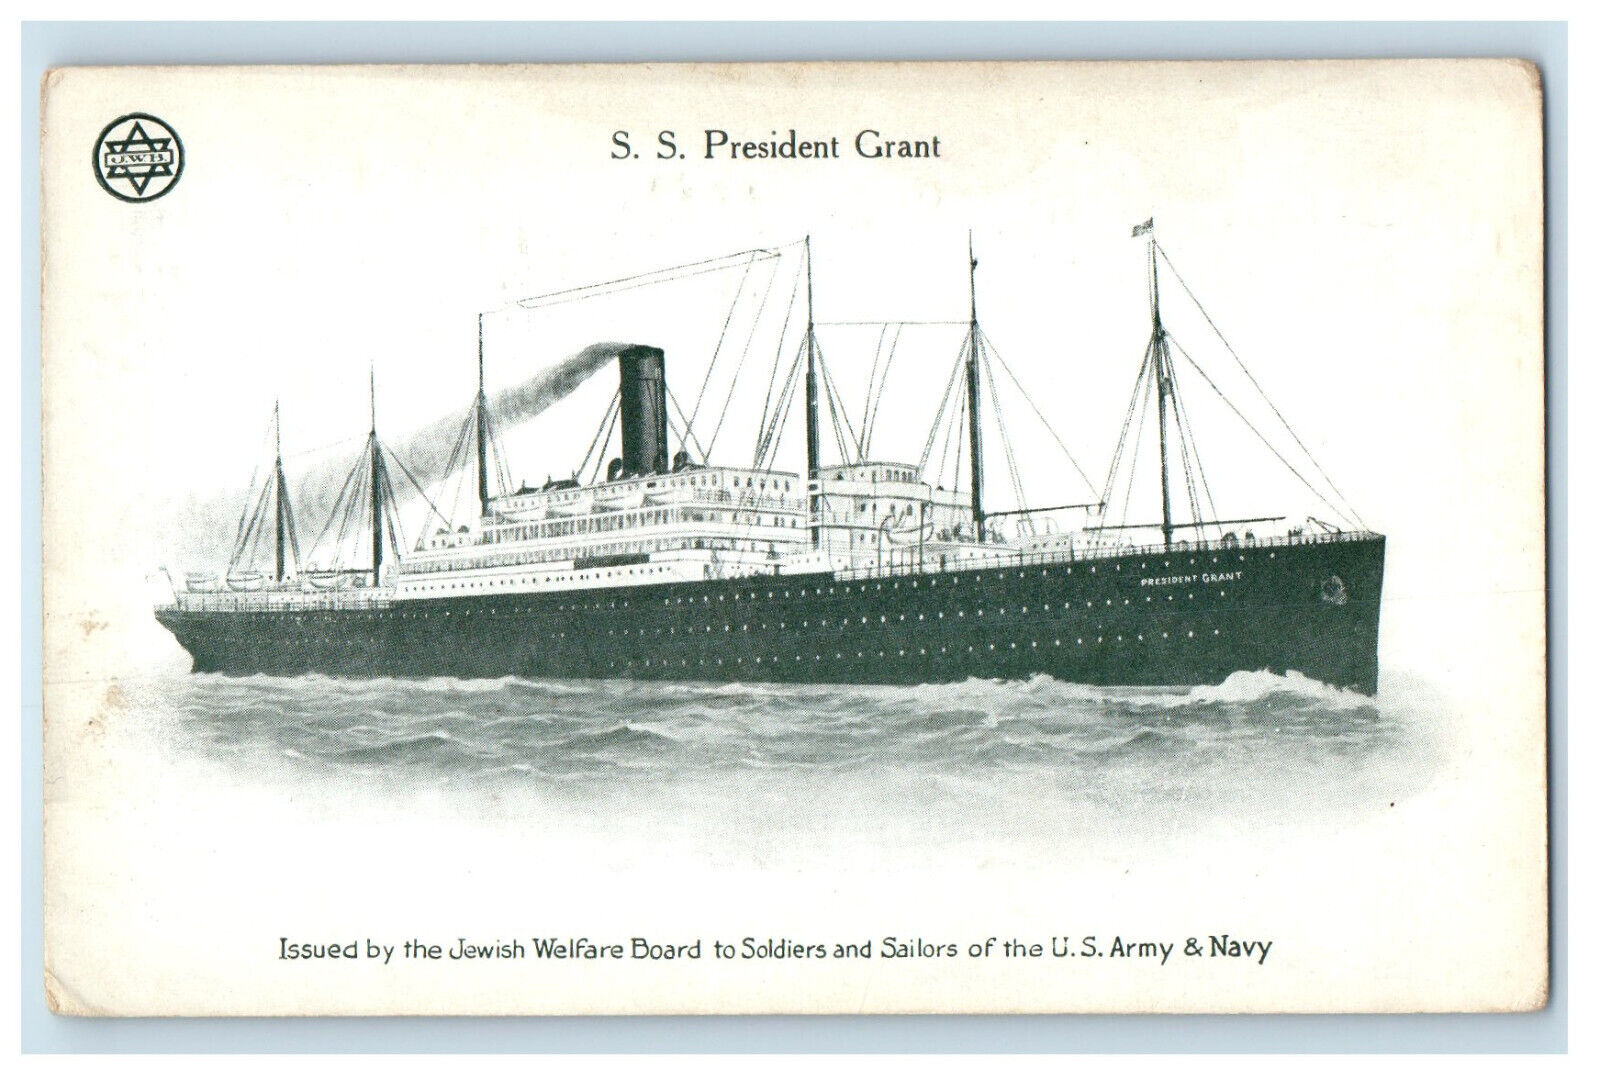 c1910 S.S President Grant For US Army and Navy By Jewish Welfare Board Postcard